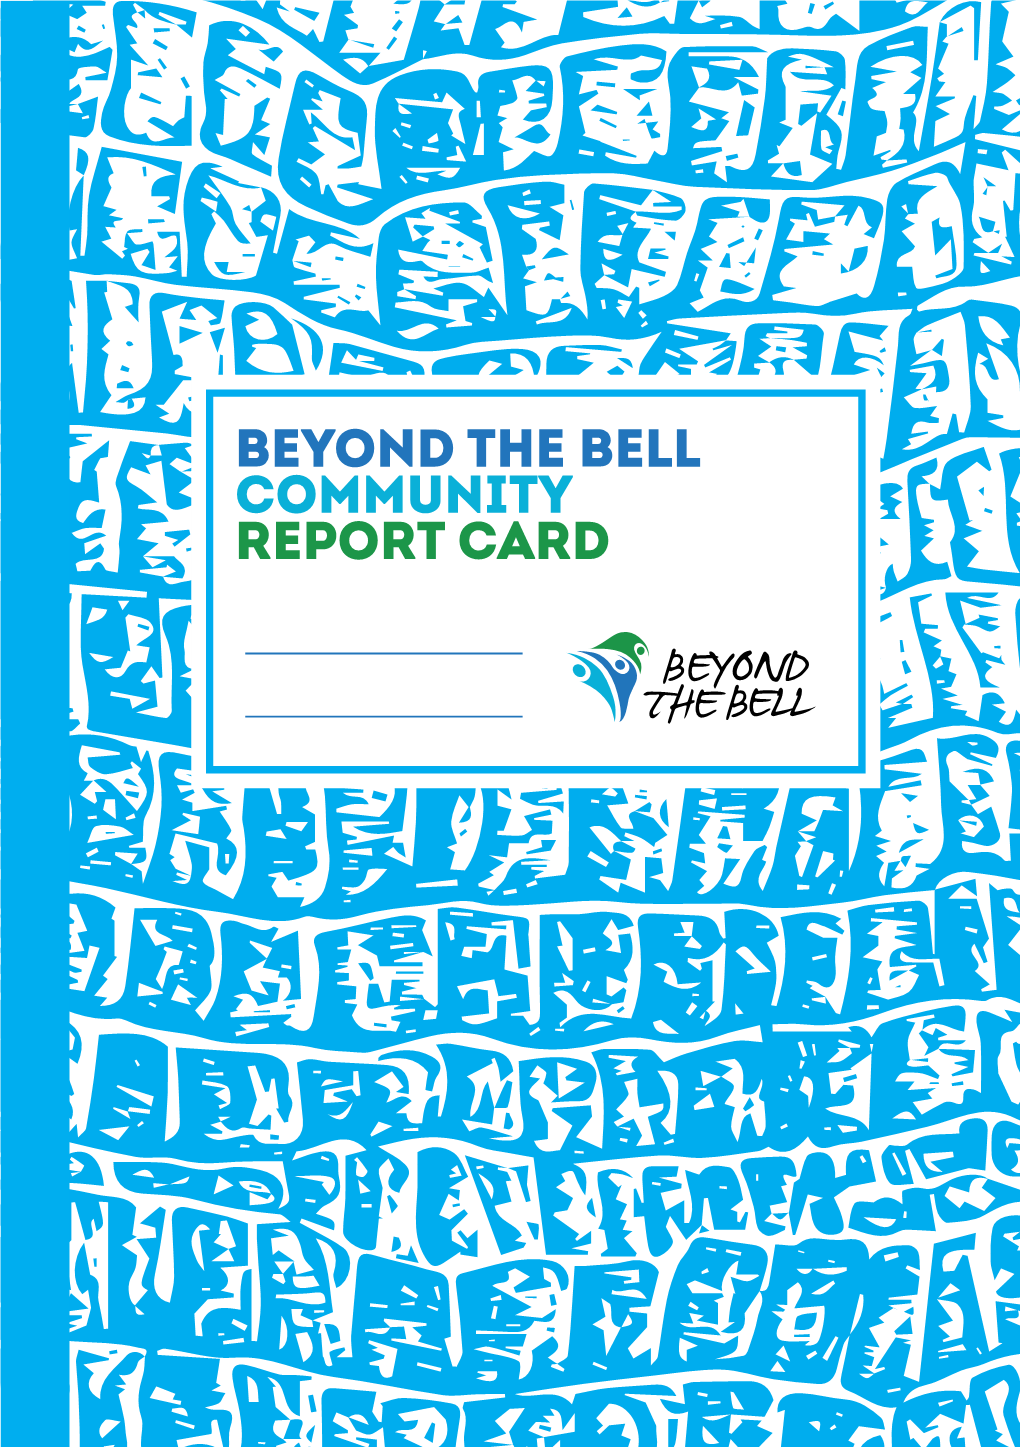 BEYOND the BELL COMMUNITY REPORT CARD What Is Beyond the Bell?